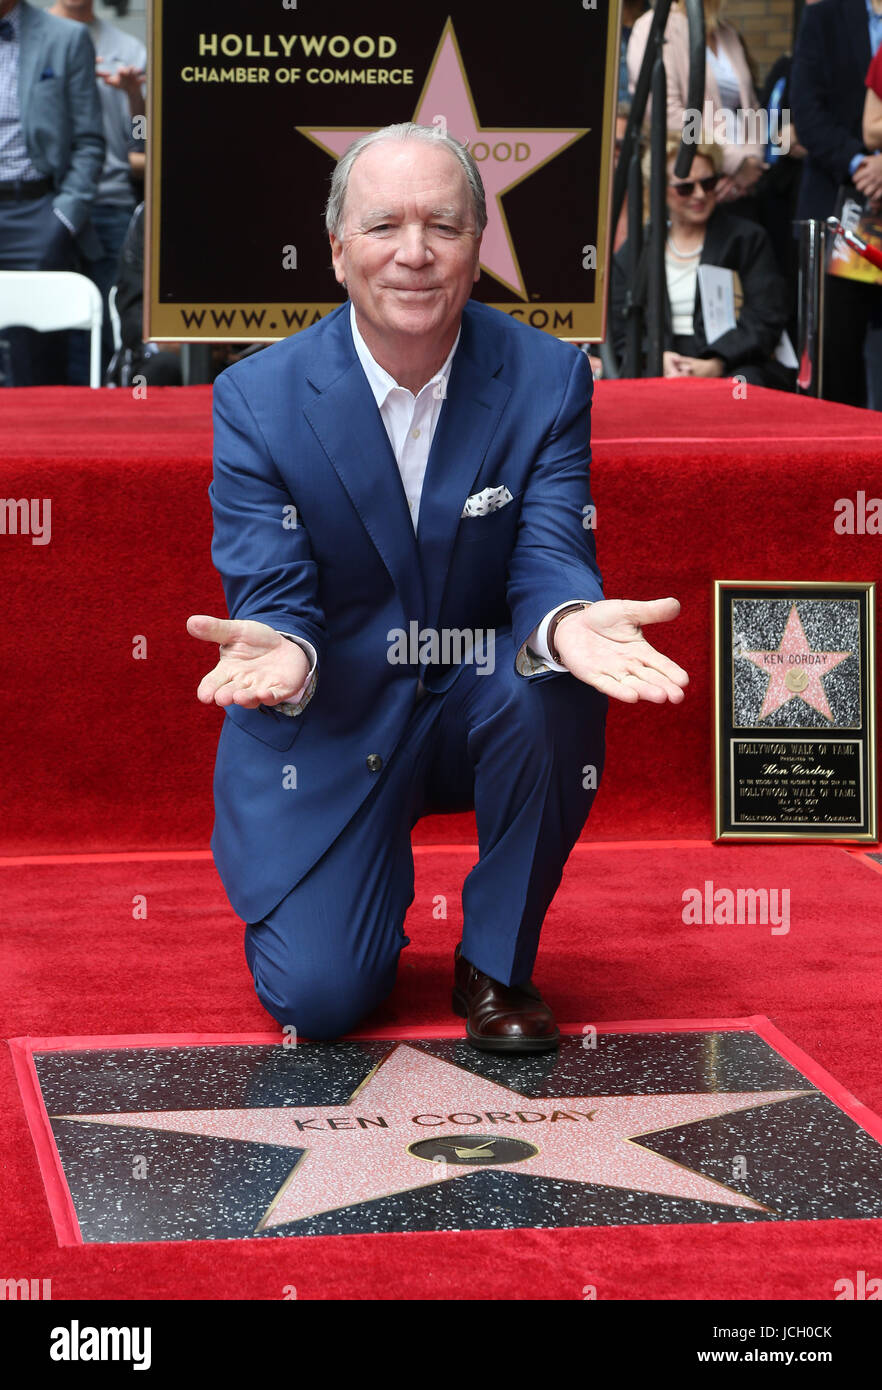 Television Producer Ken Corday Honored With Star On The Hollywood Walk Of Fame  Featuring: Ken Corday Where: Hollywood, California, United States When: 15 May 2017 Credit: FayesVision/WENN.com Stock Photo